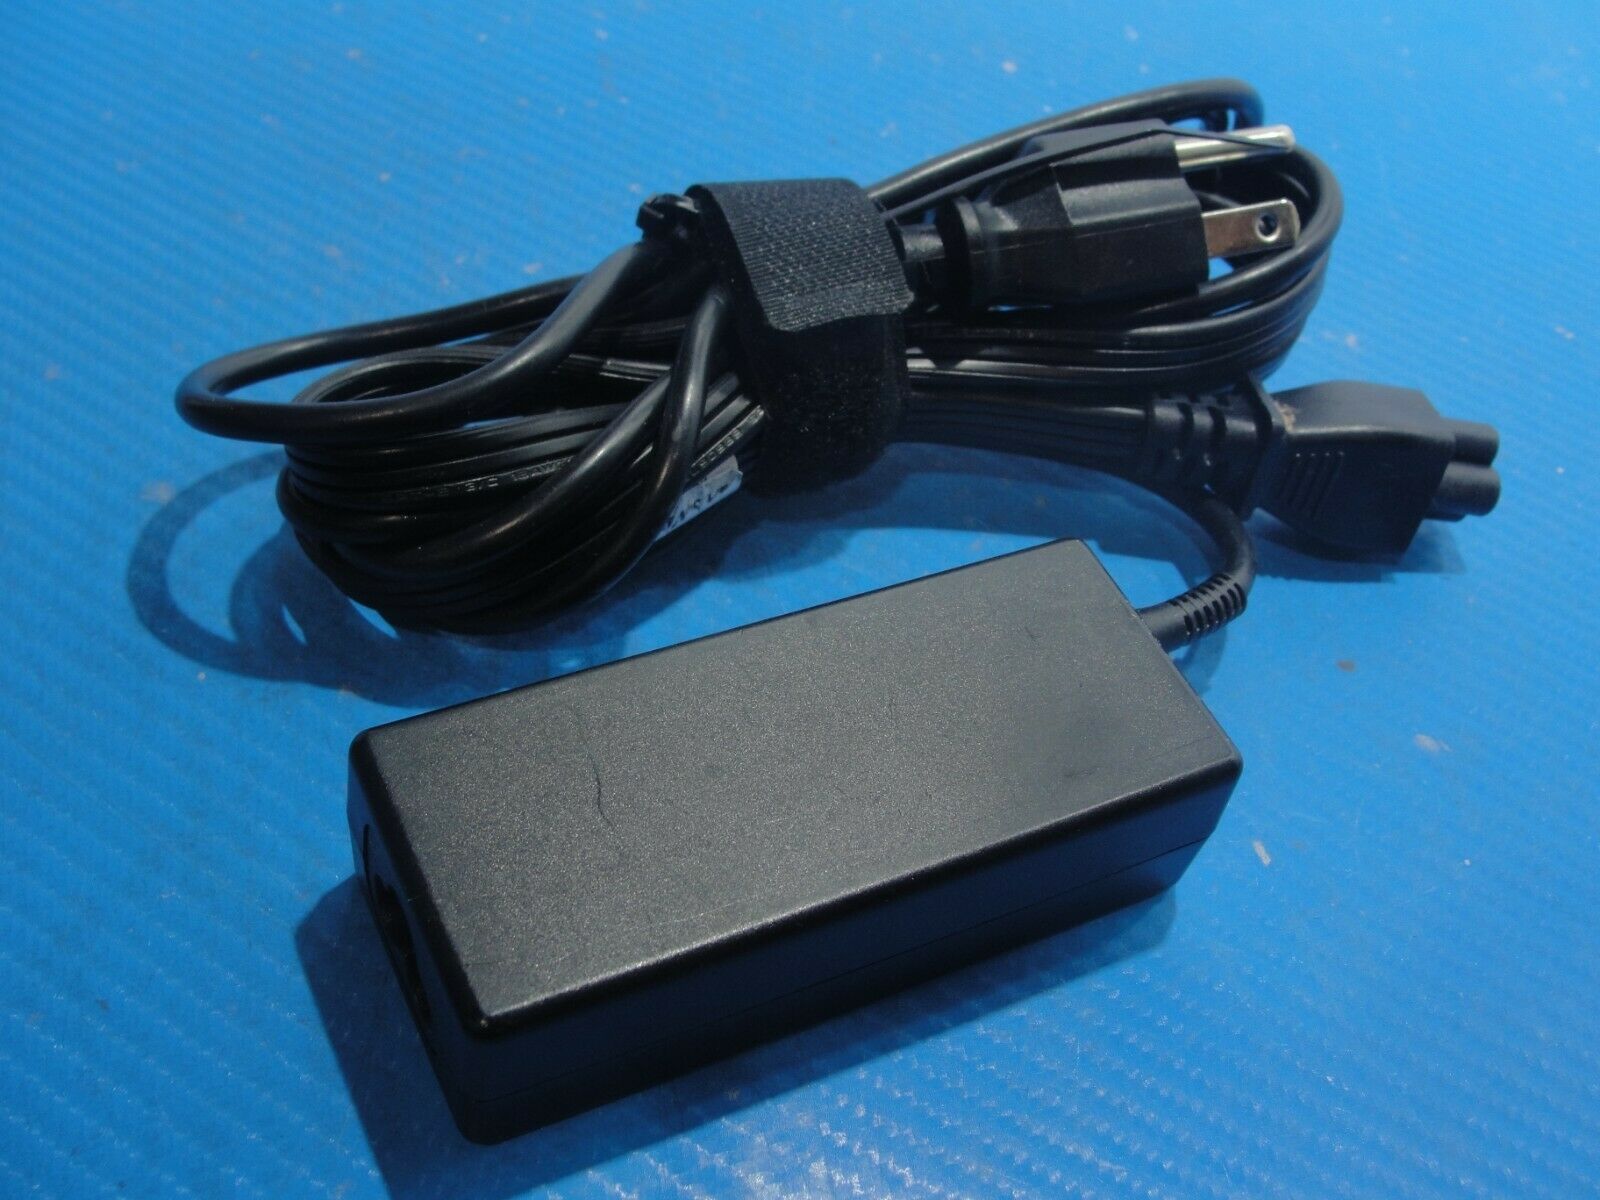 Lot of 10: HP AC Adapter Power Charger 19.5V 2.31A 45W 741727-001 